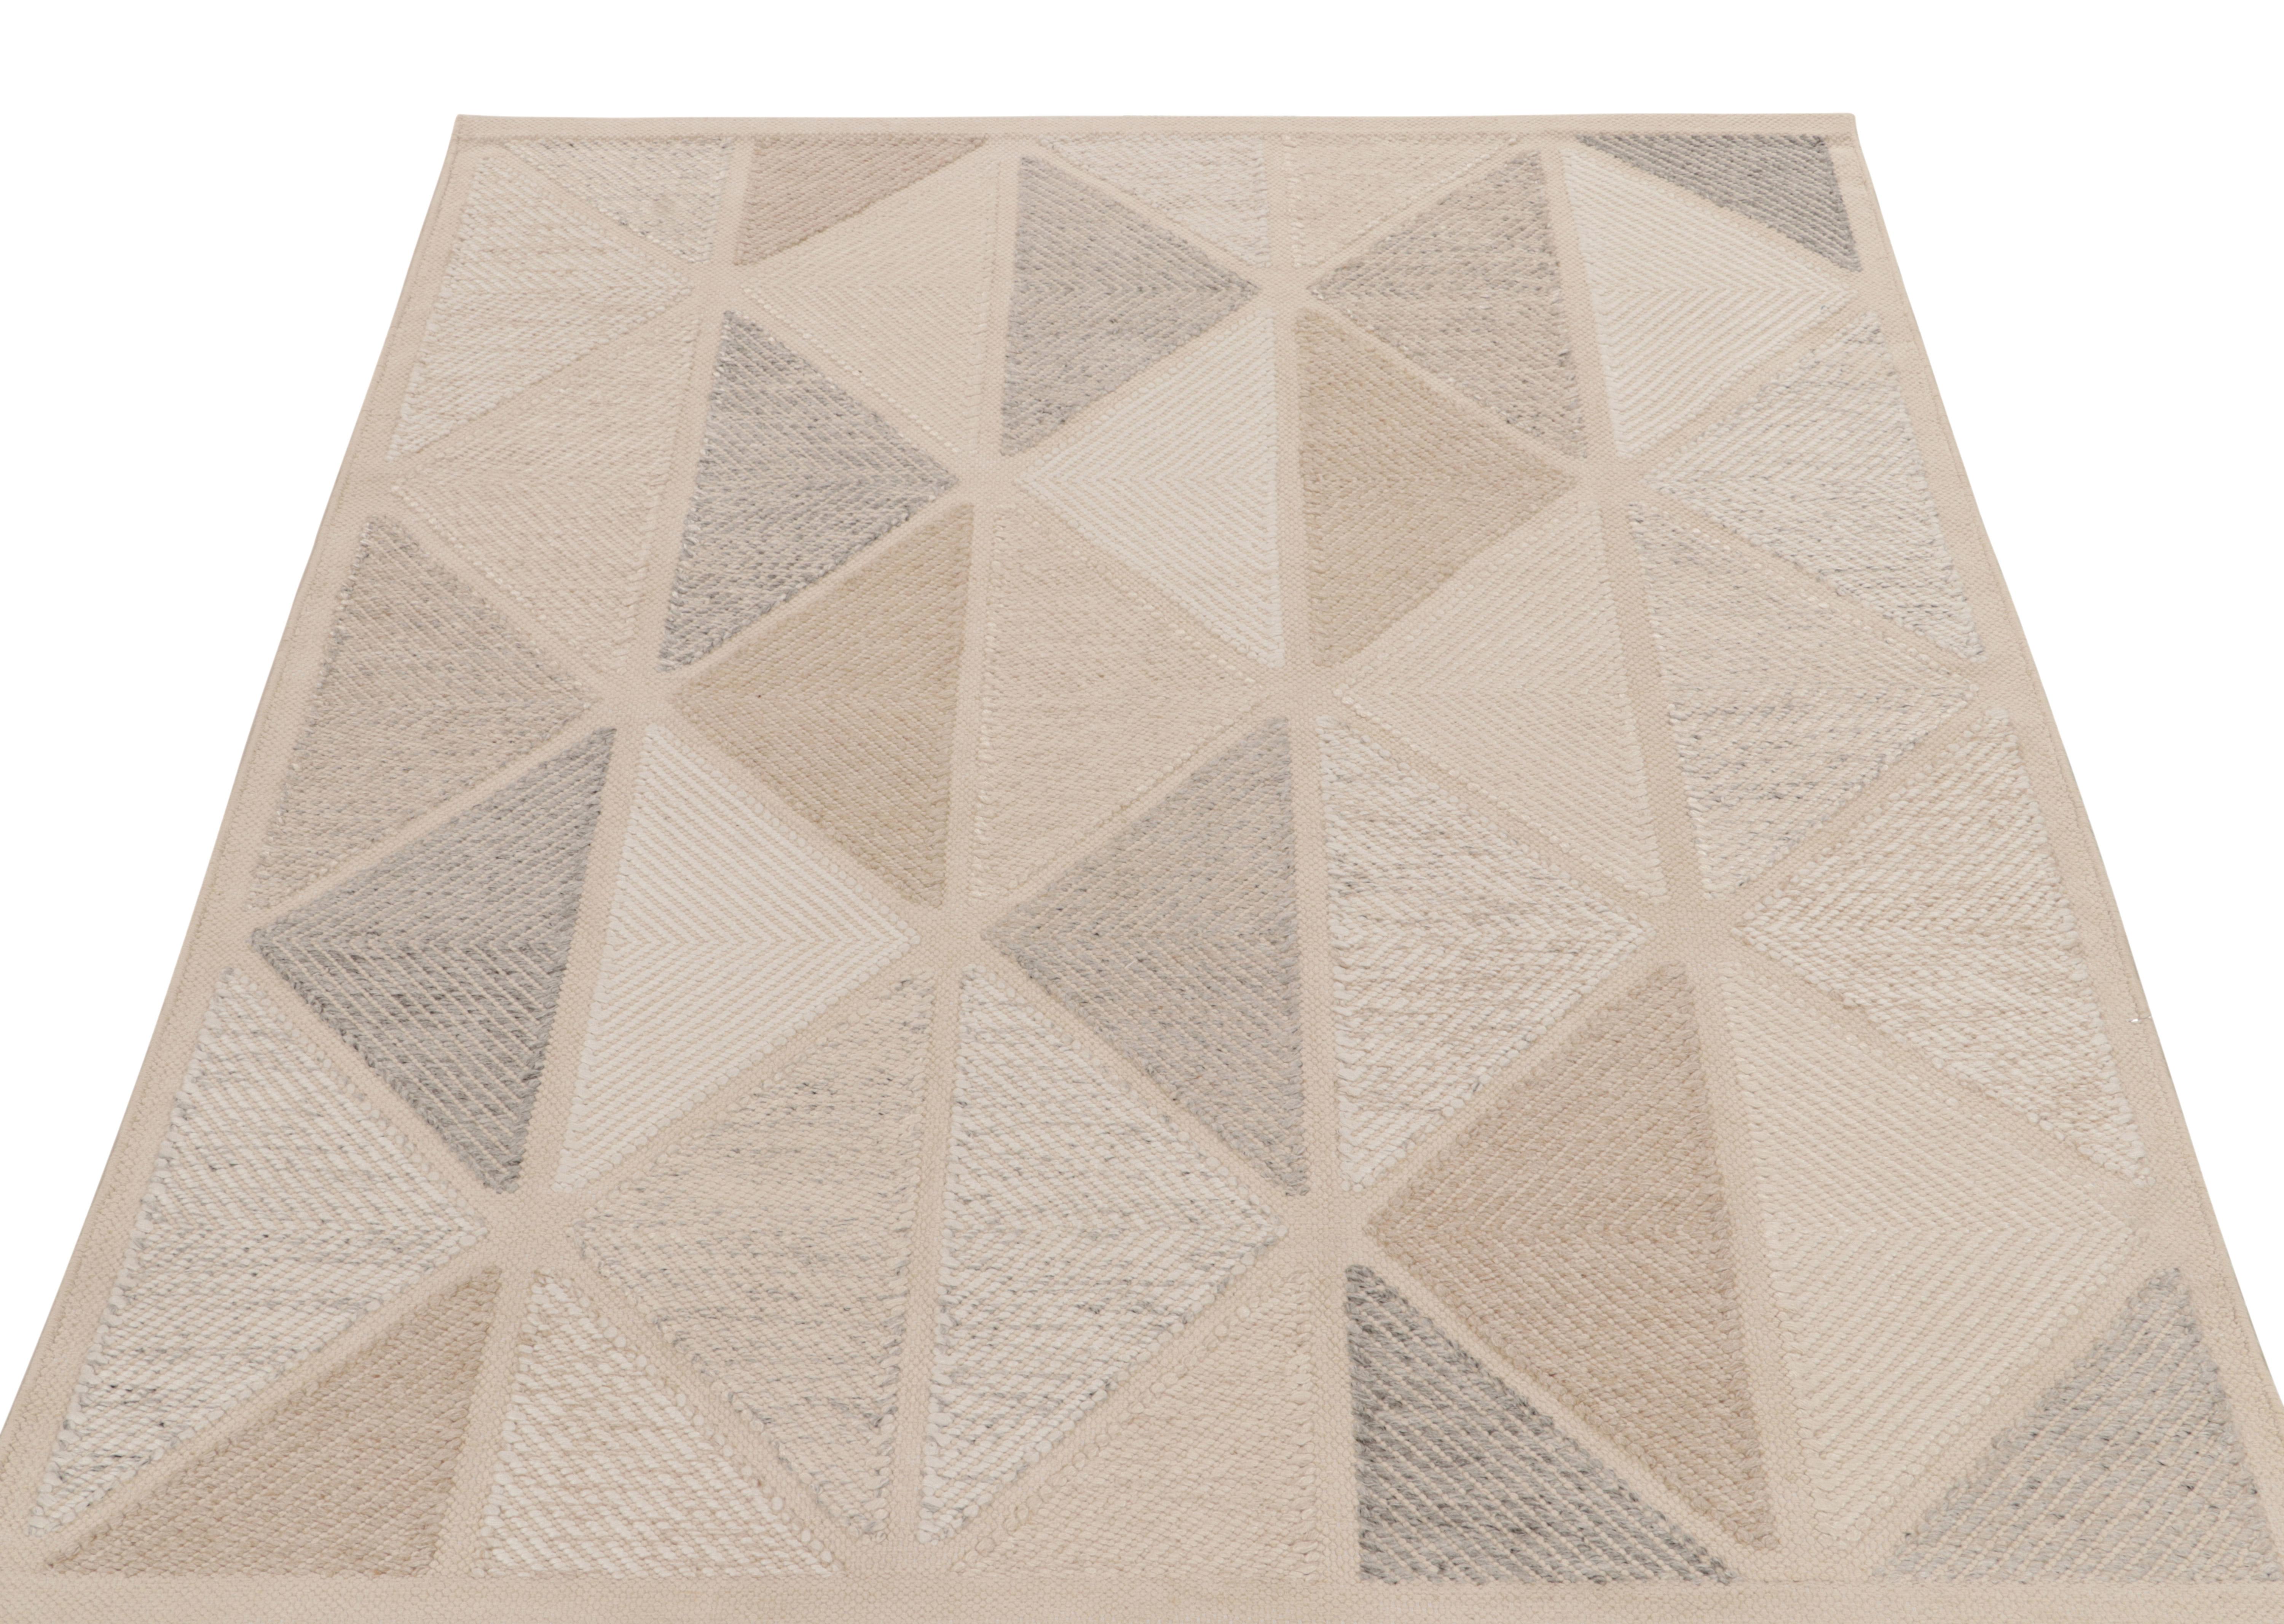 Rug & Kilim presents this exquisite 6x7 Scandinavian kilim from the Morocco line of the award-winning flat weave texture. The handwoven piece flows in an all over half diamond pattern in a delightful blend of beige, stone blue, gray & white. The